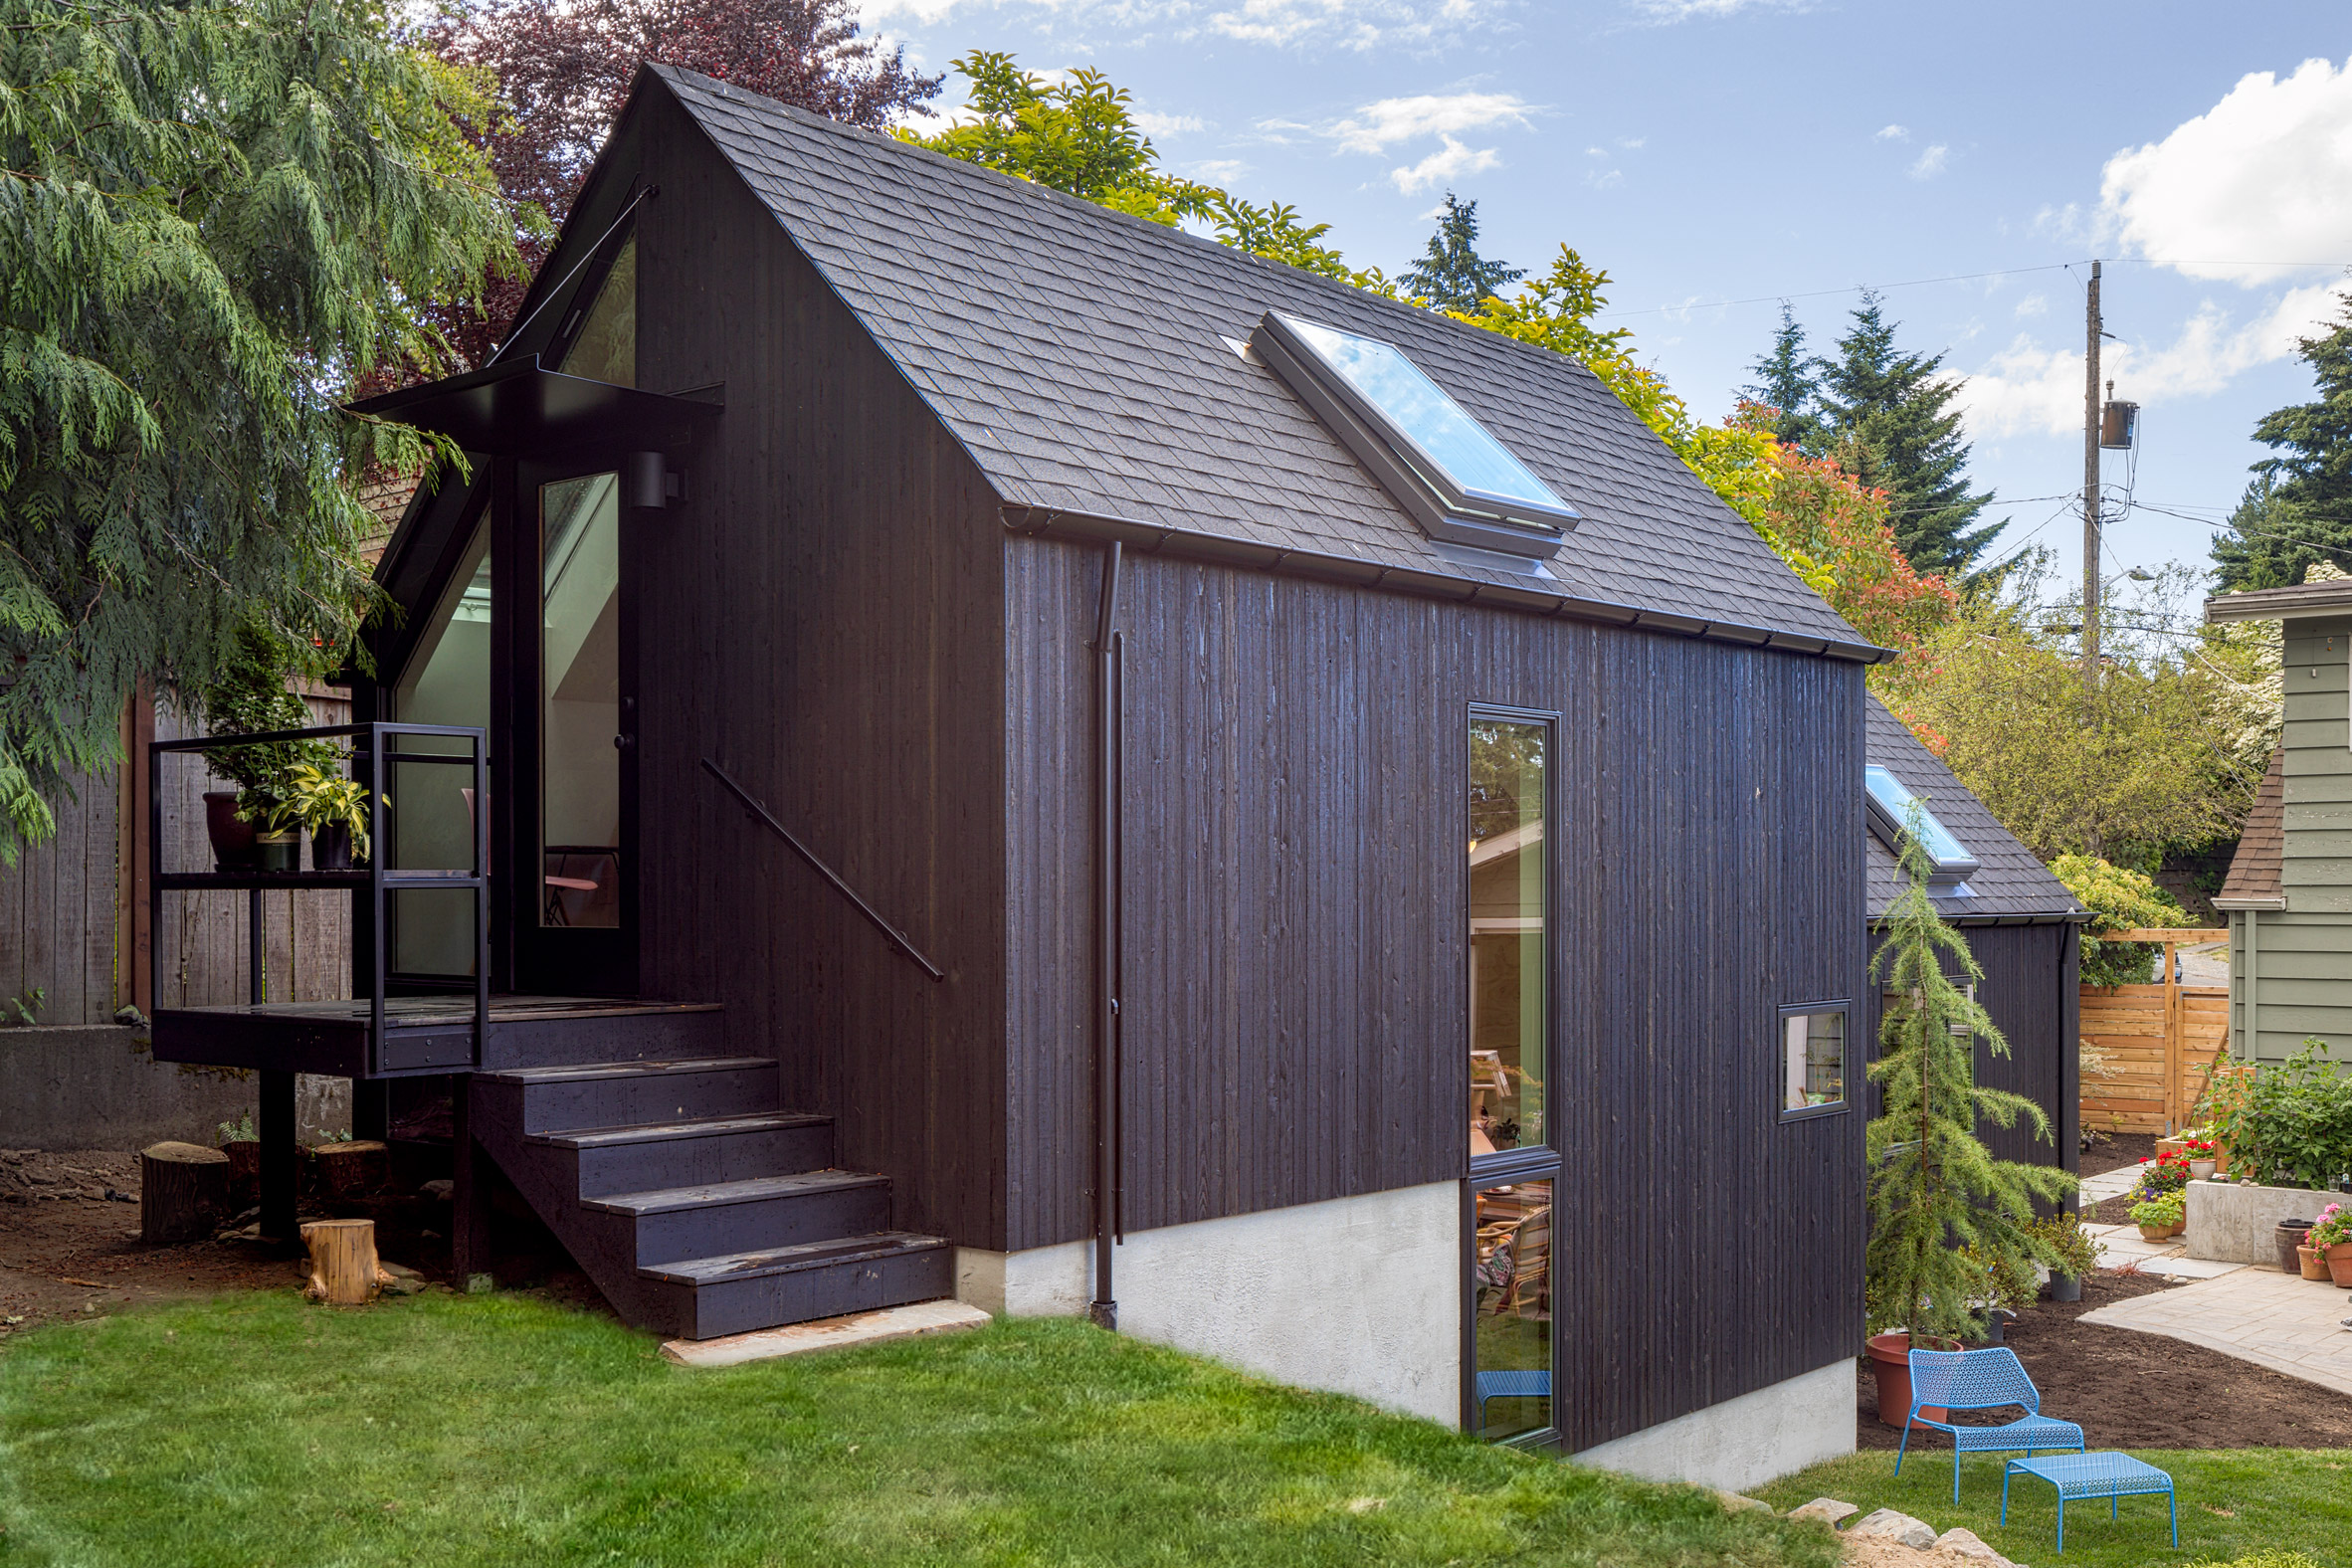 Seattle Granny Pad by Best Practice provides living space in unused garage